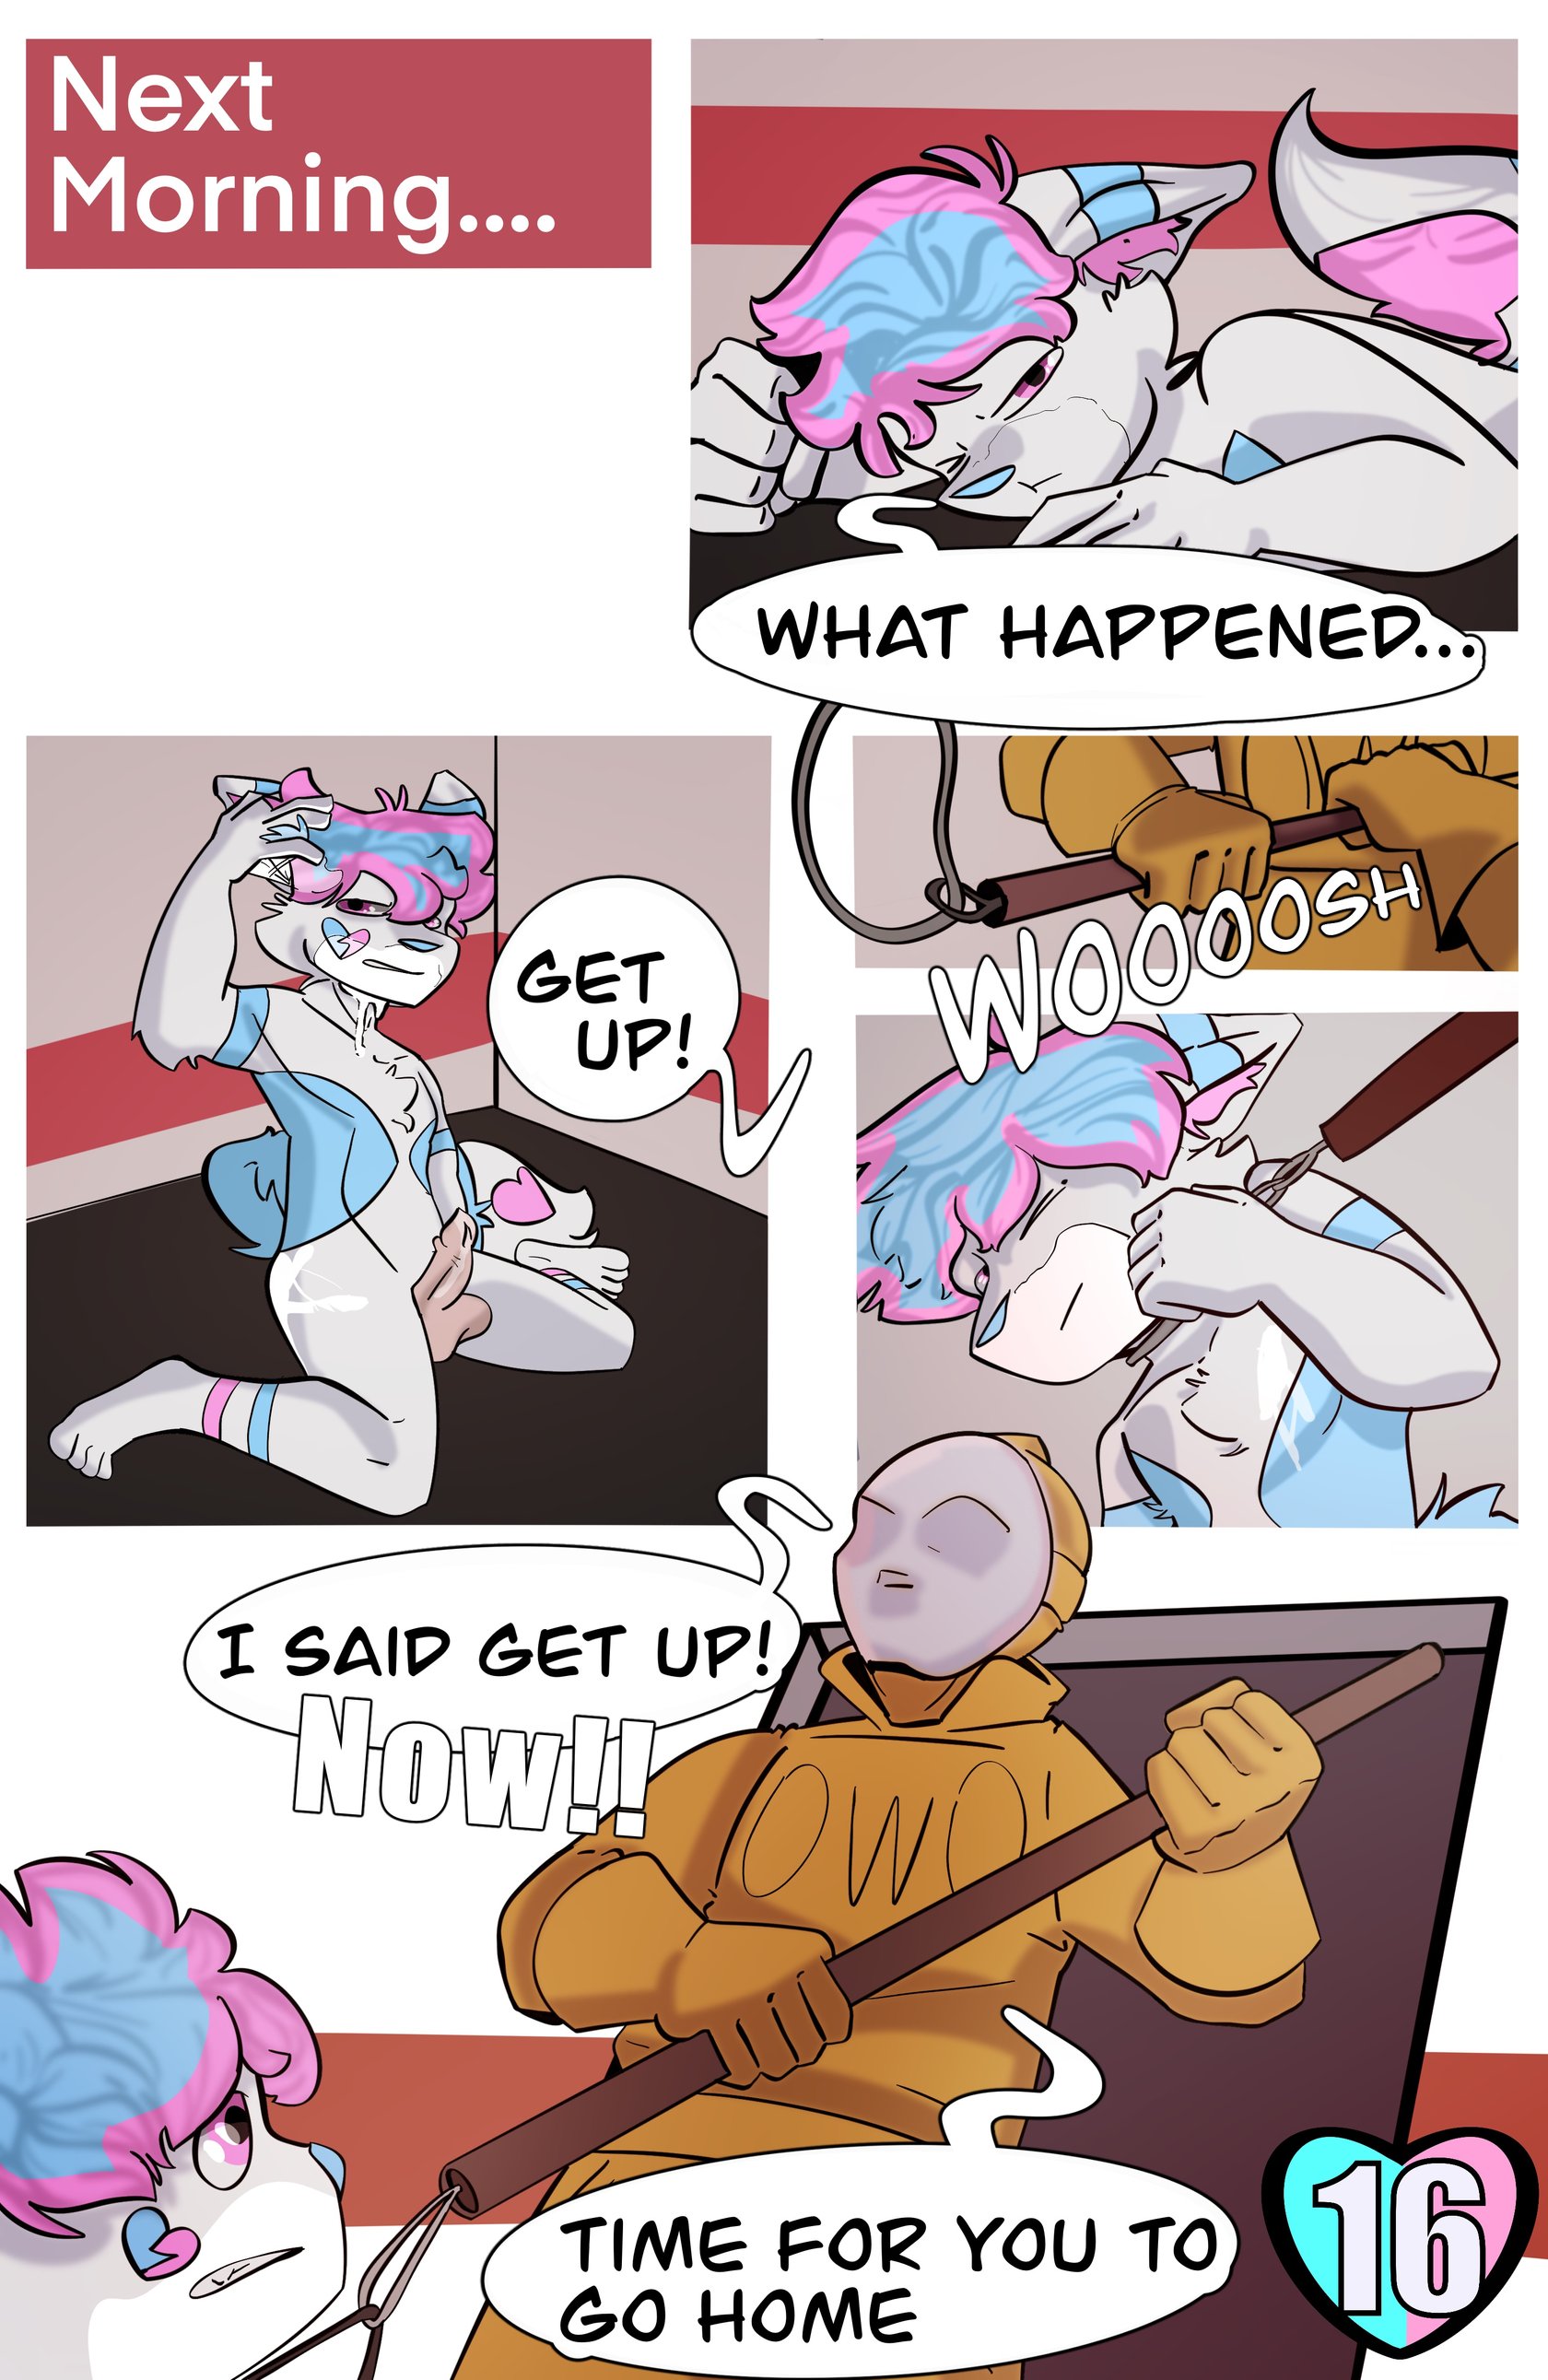 Yiff Sex Change - A Furry Change & New Life Changes (ongoing) comic porn - HD Porn Comics